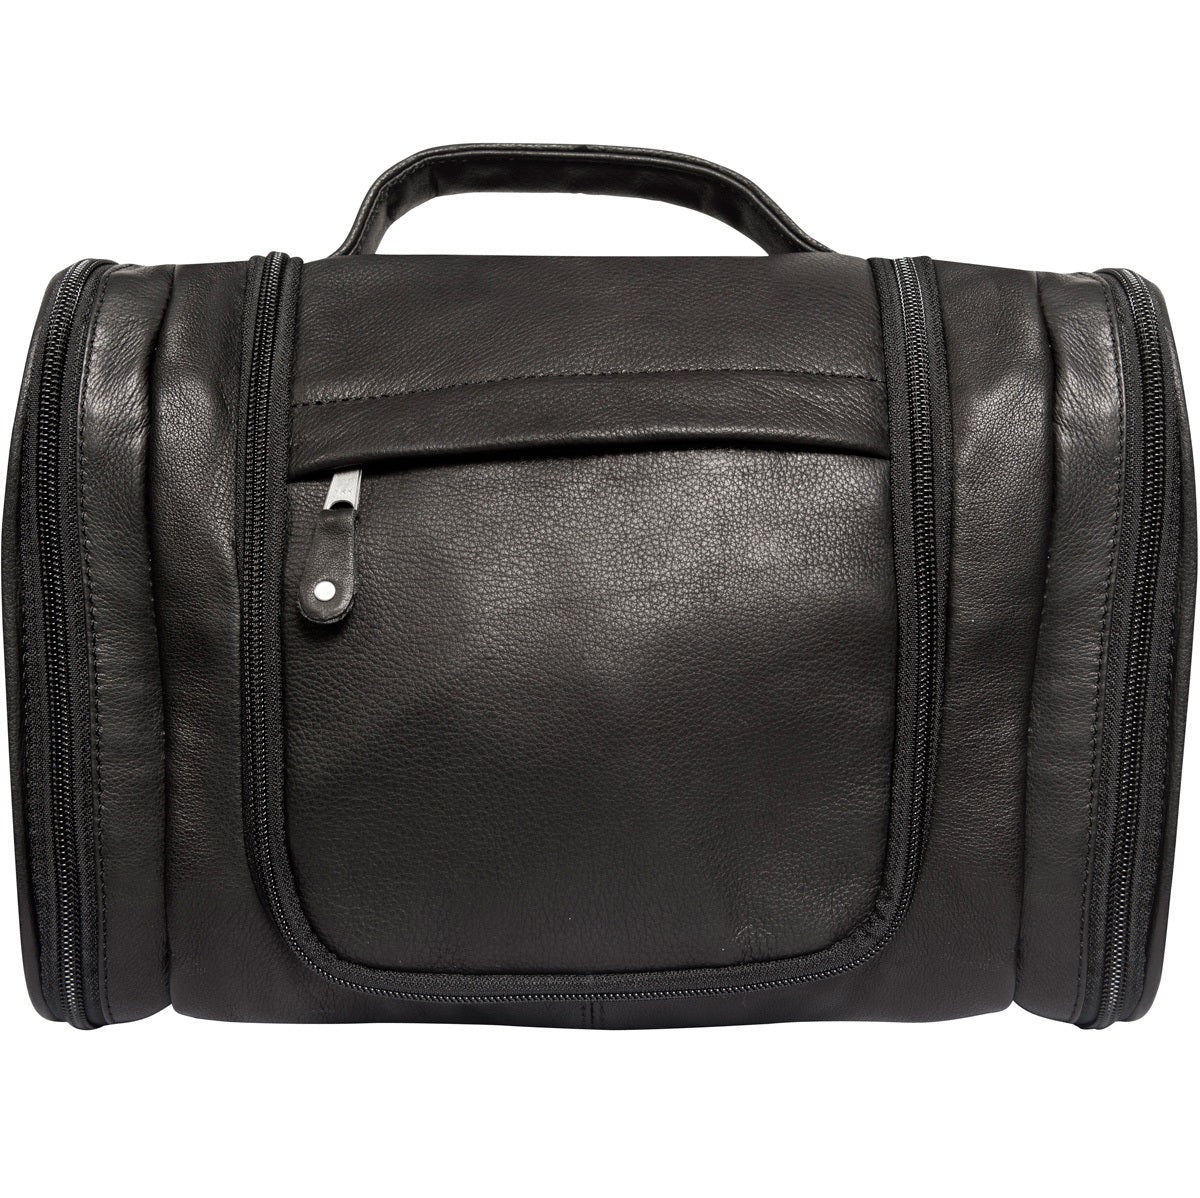 Genuine Leather Hanging Toiletry Bag